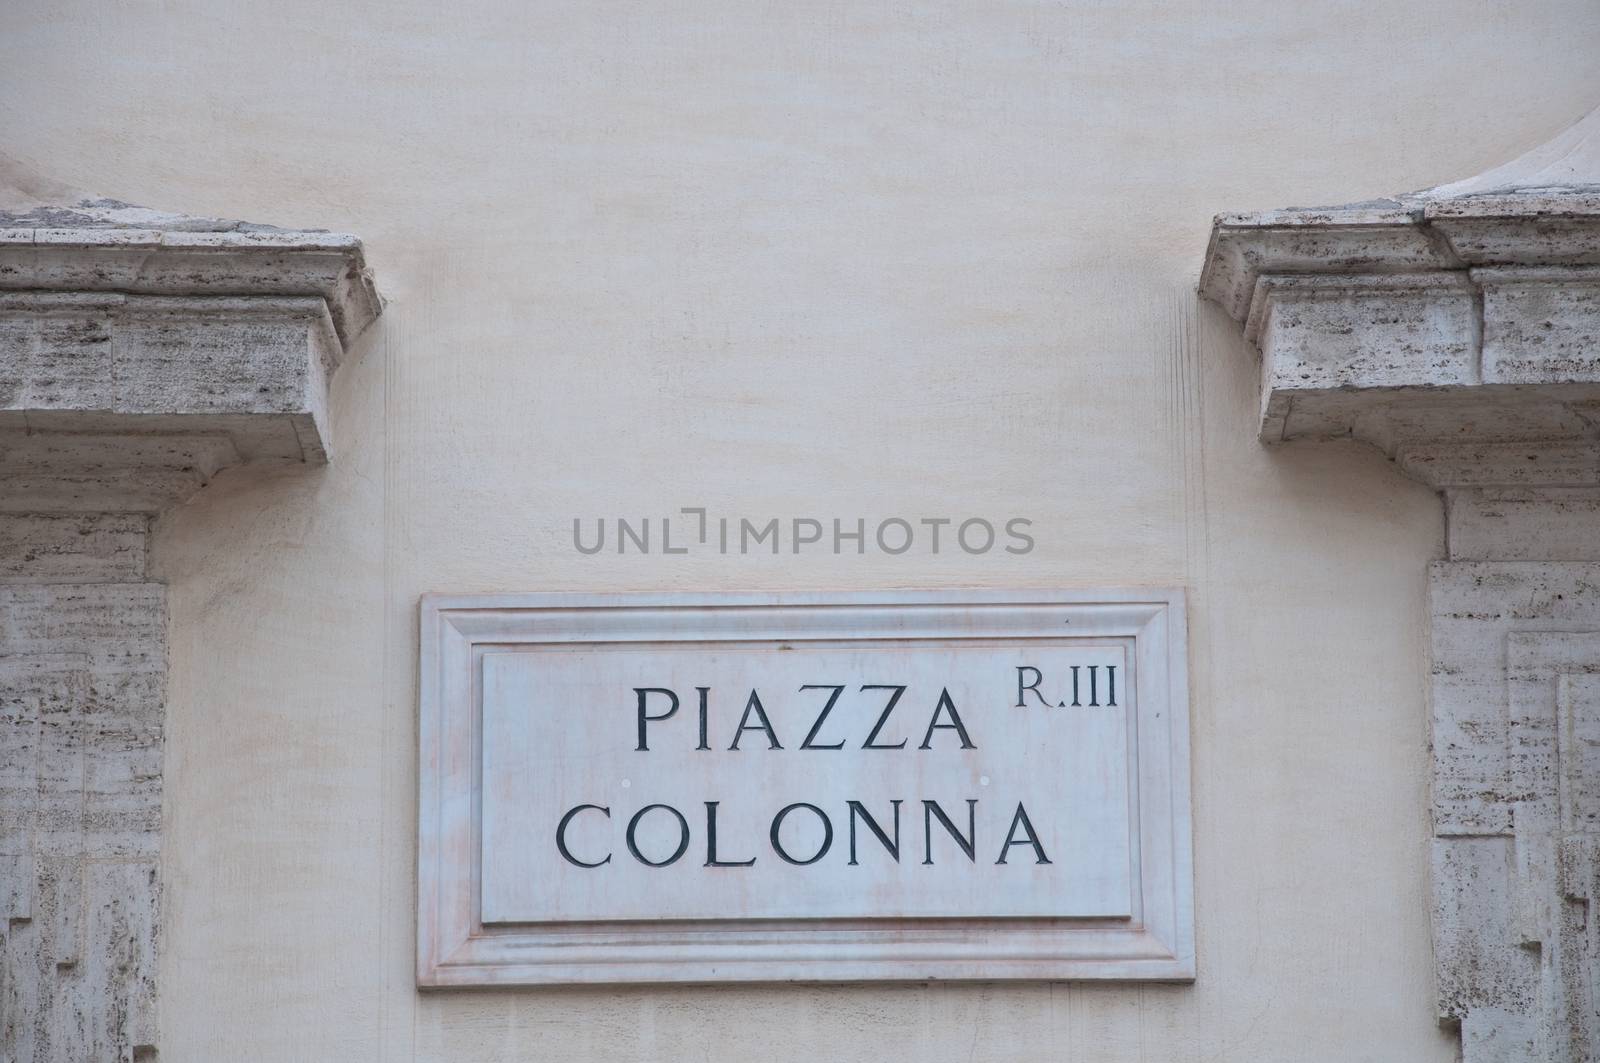 Road sign indicating a street name in Italian "piazza colonna"in English means colonna square, rome